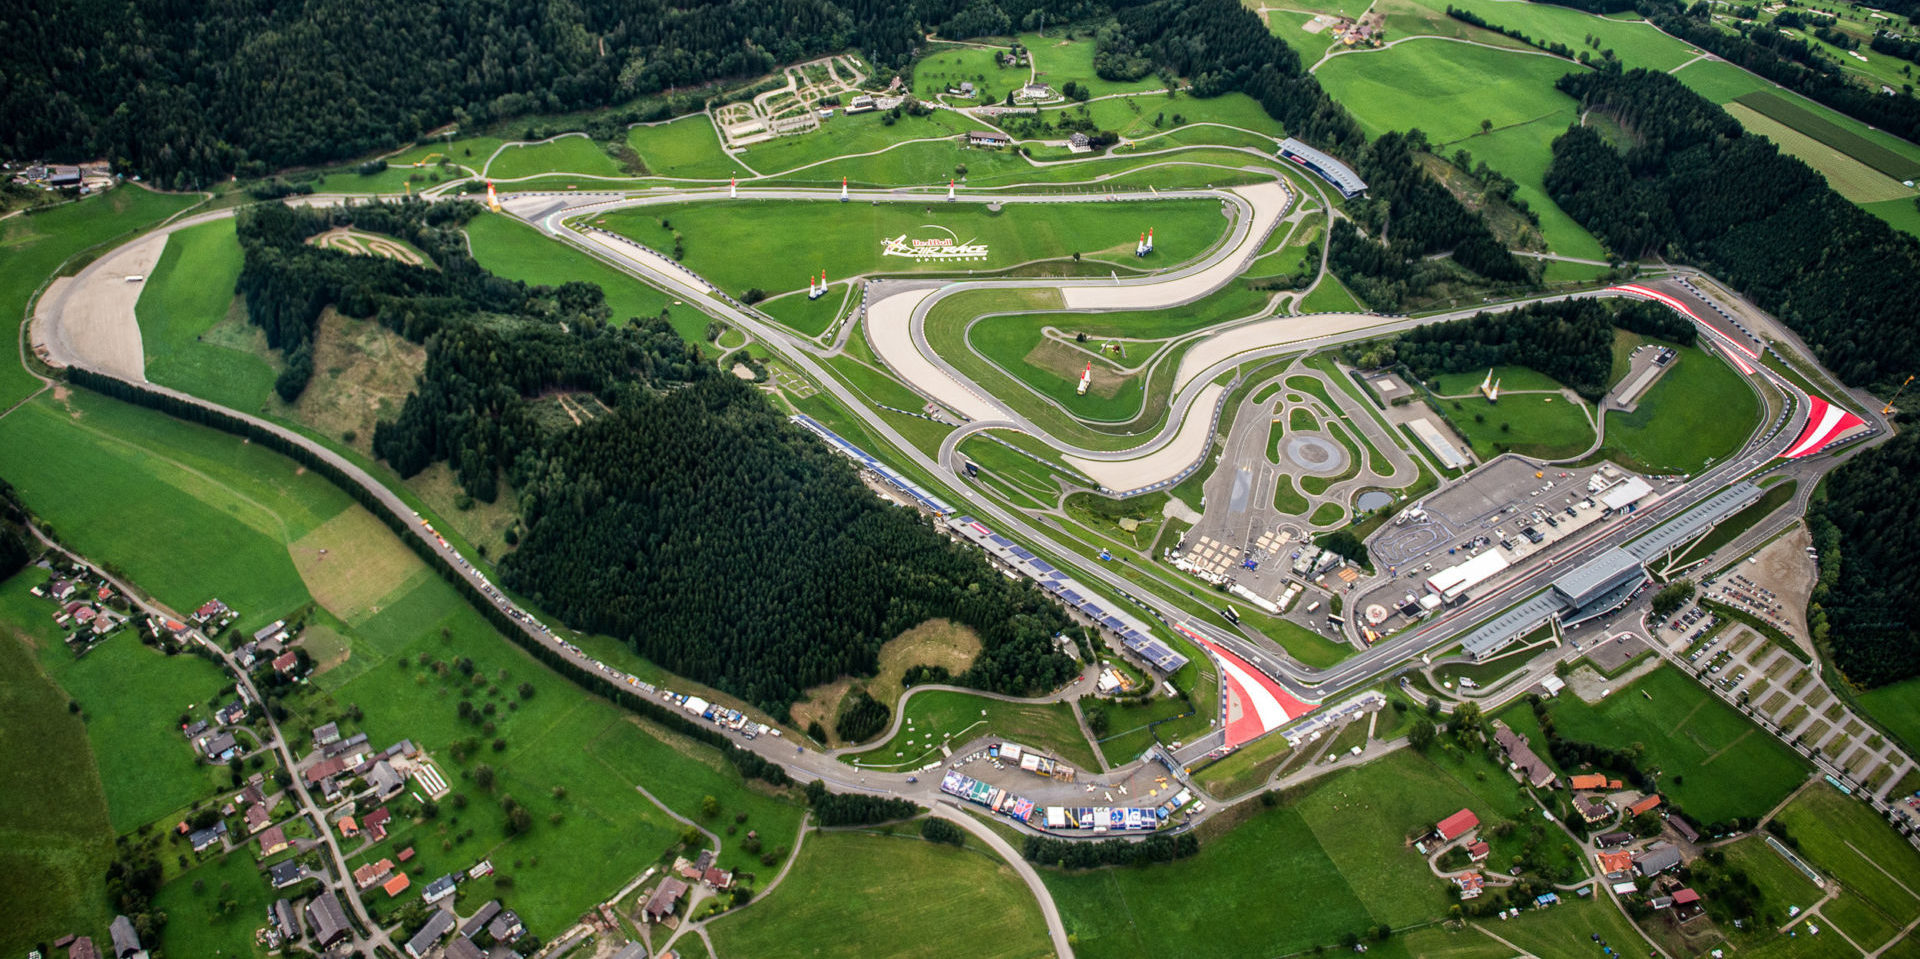 Motogp New Chicane Installed At Red Bull Ring With Video Roadracing World Magazine Motorcycle Riding Racing Tech News